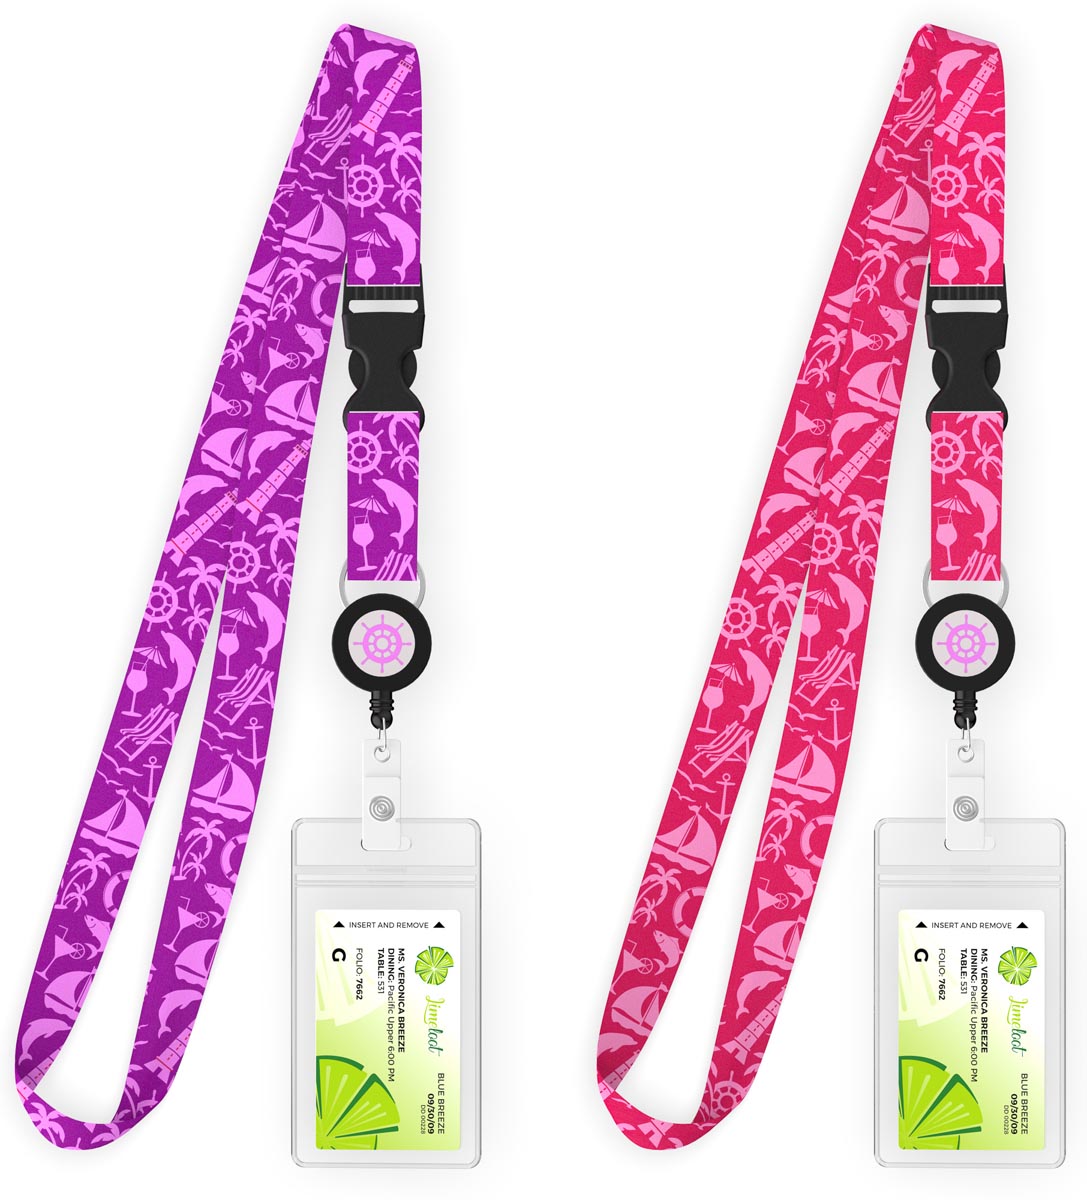 Cruise Lanyard with Badge Reel, Buckle, and Card Holder, 2-Pack